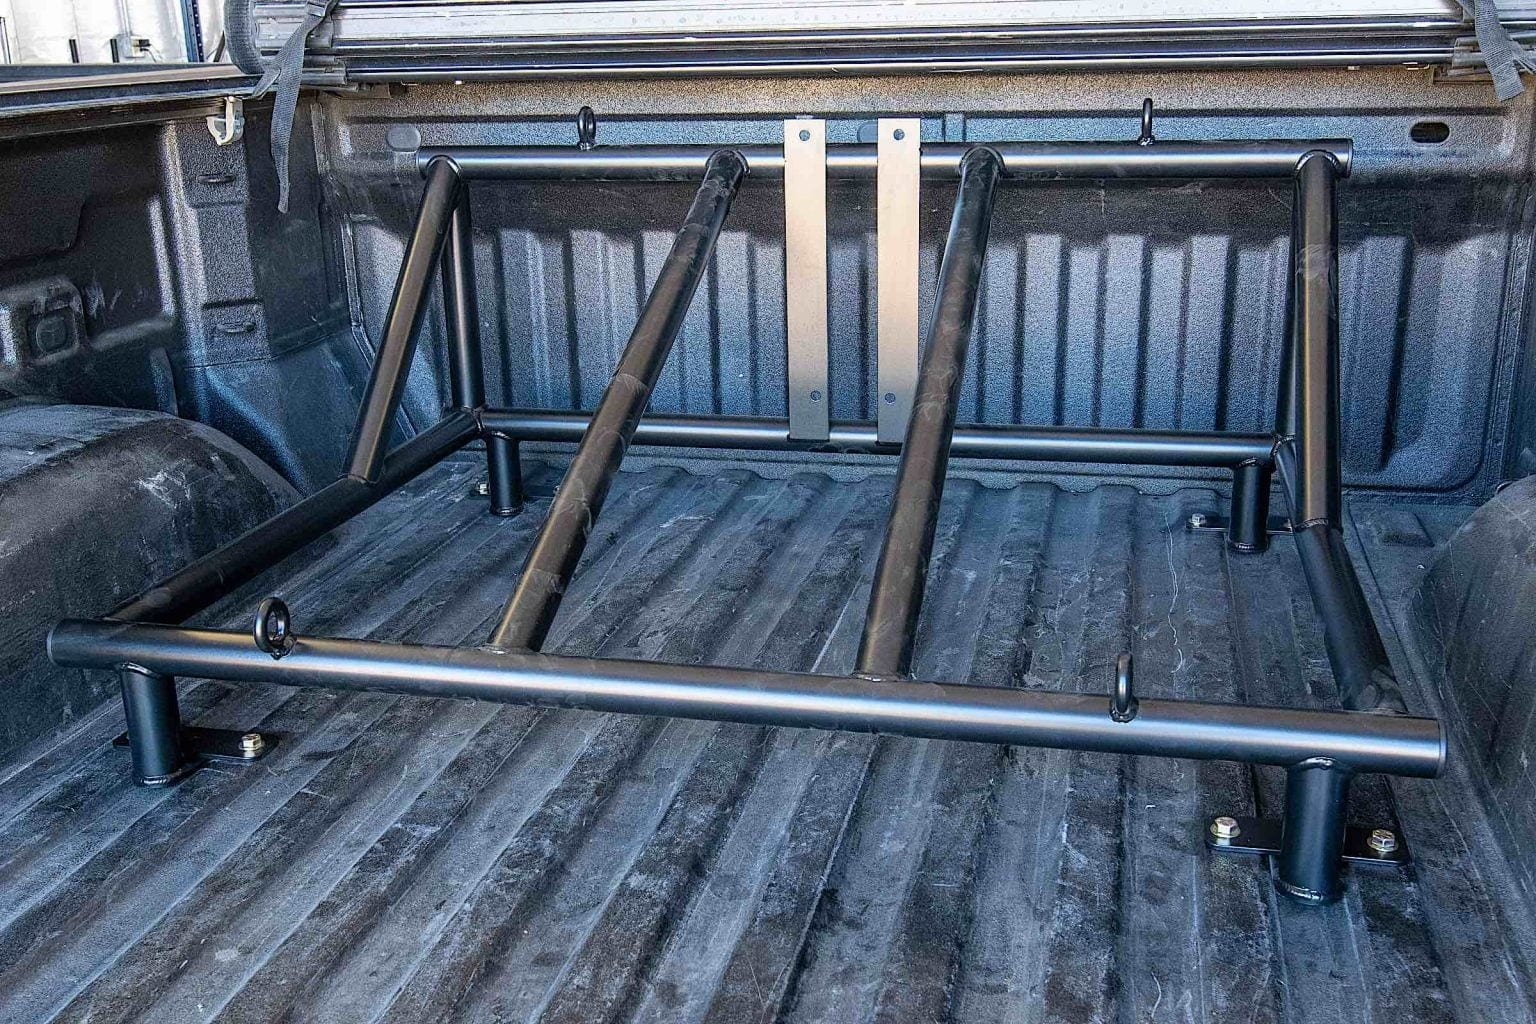 Installing a tire rack into a truck bed.